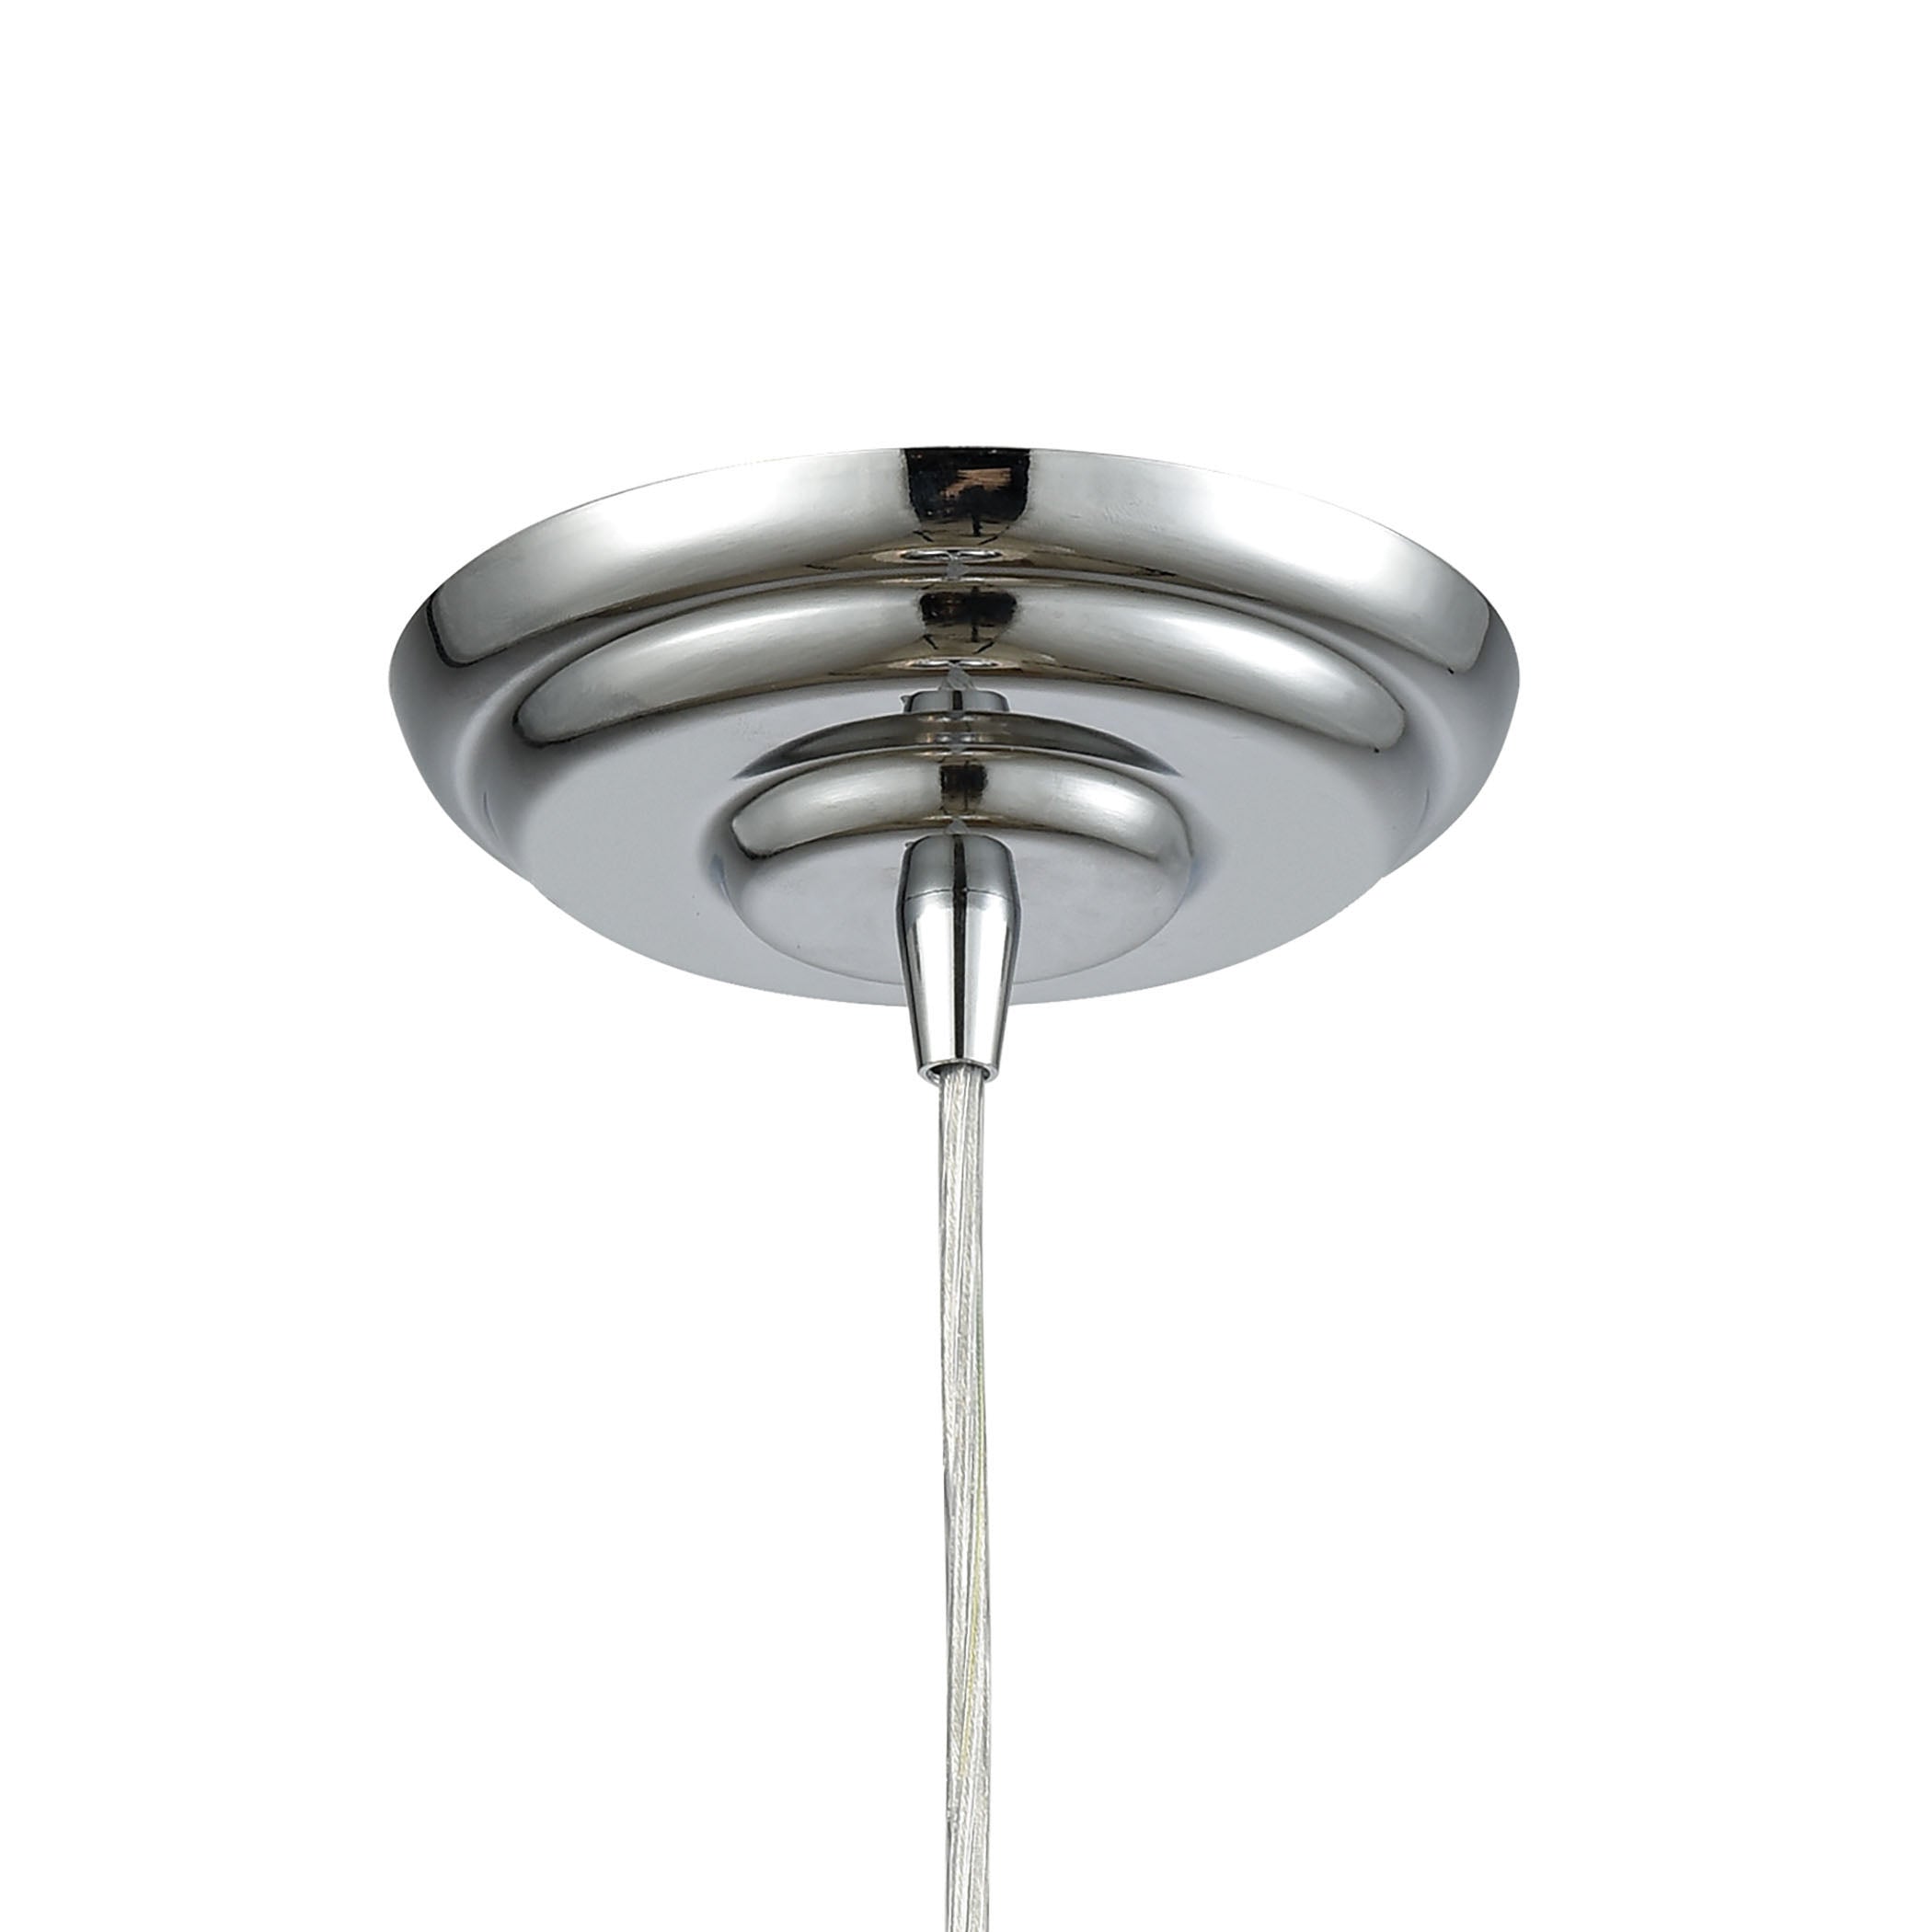 ELK Lighting 56591/1 Victoriana 1-Light Mini Pendant in Polished Chrome with Clear Patterned Glass